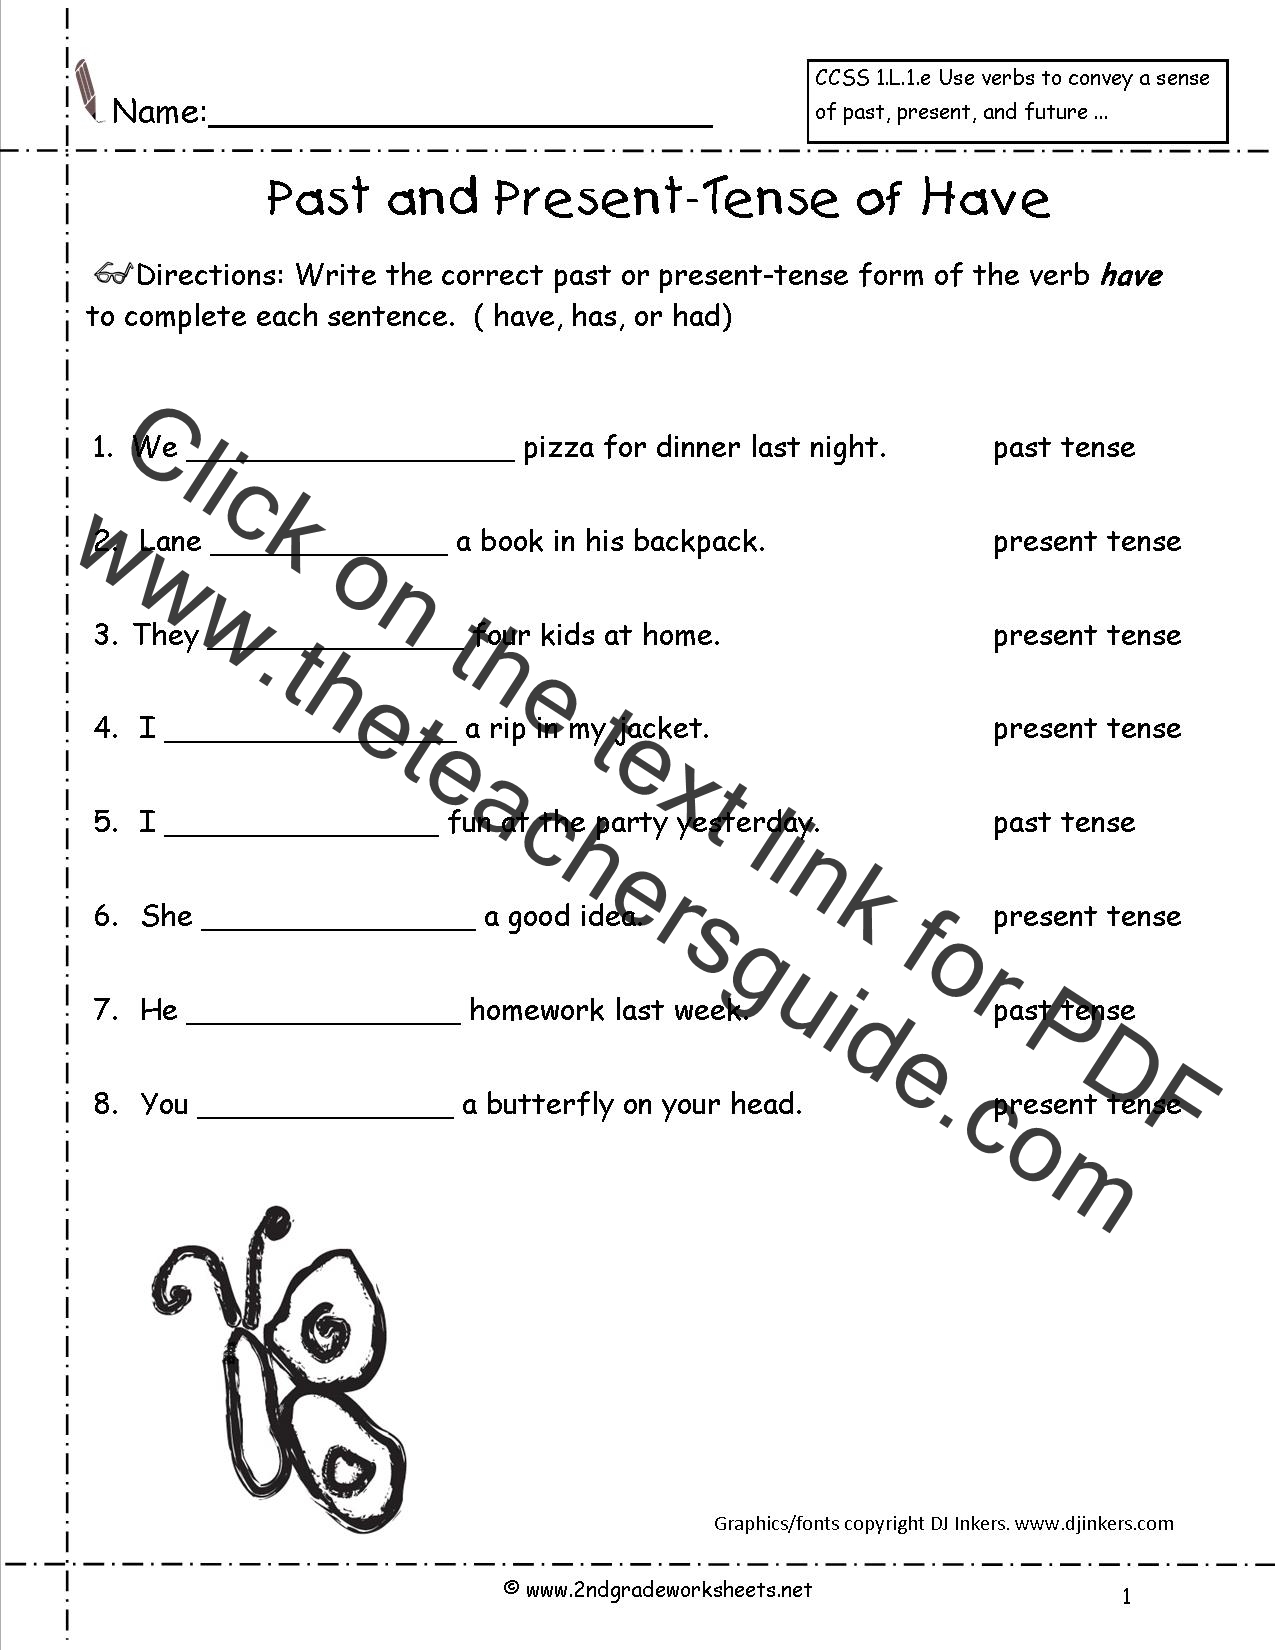 action-verbs-worksheets-3rd-grade-your-home-teacher